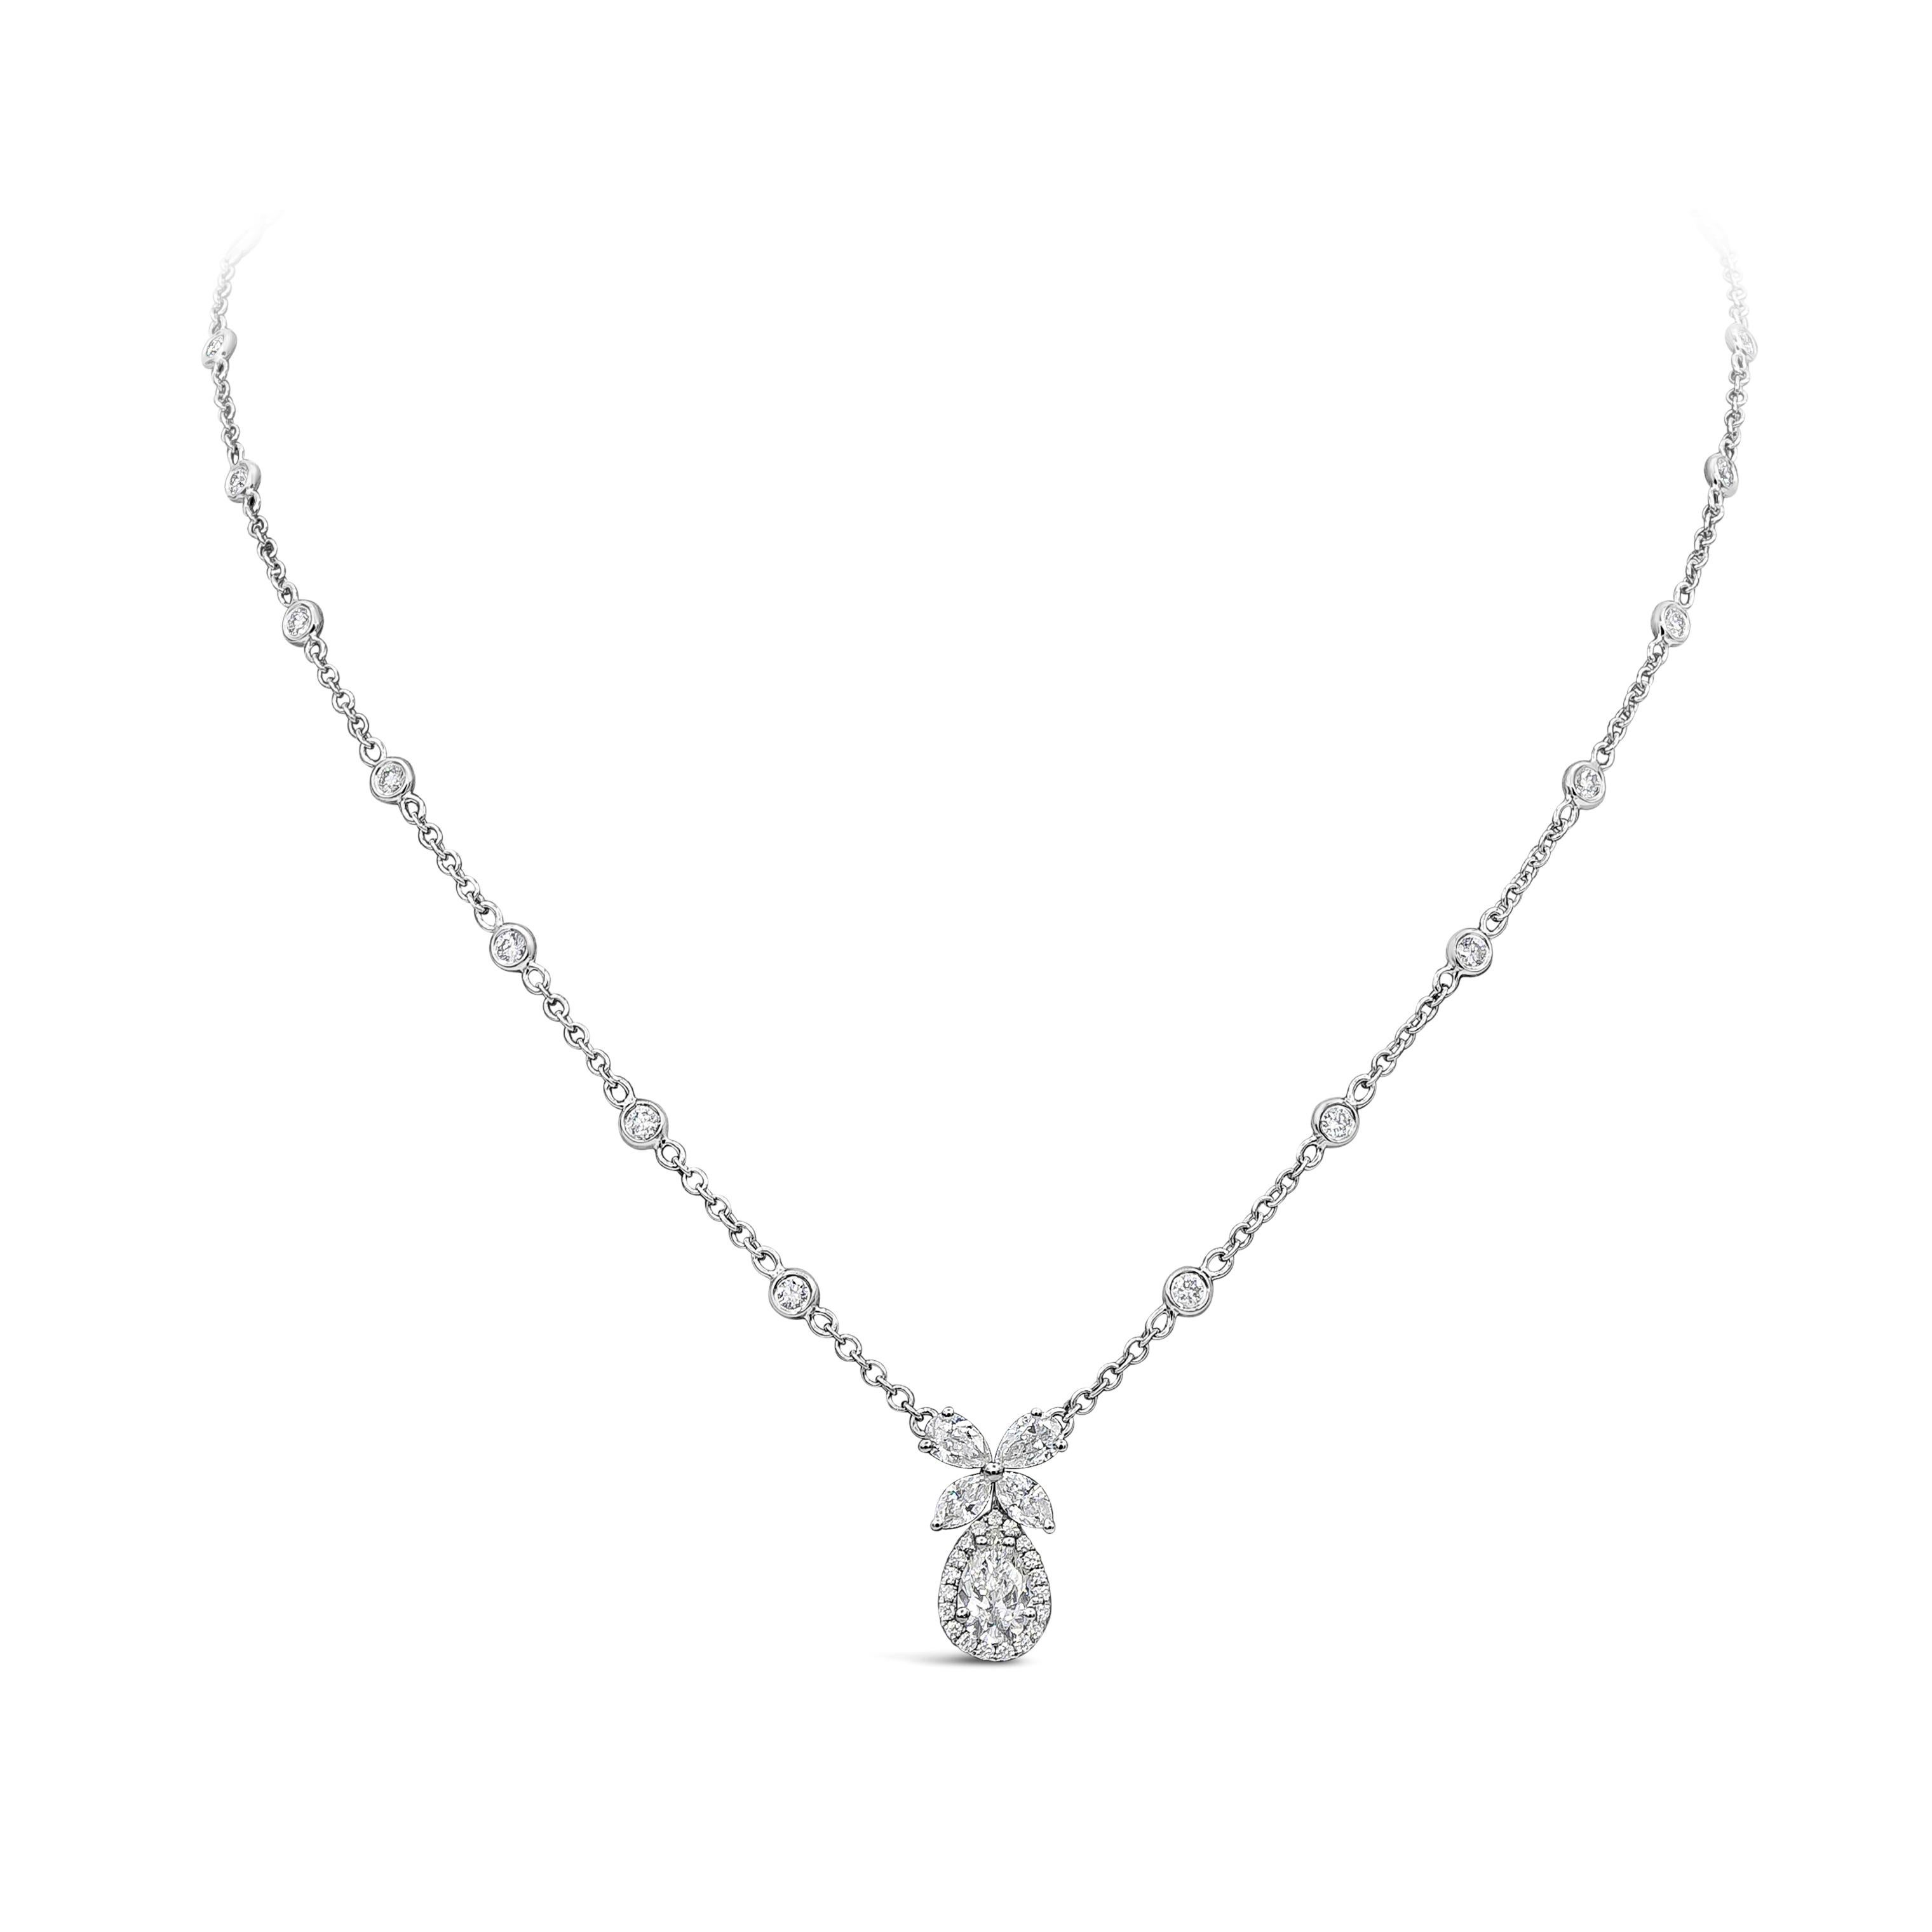 A simple and versatile pendant necklace showcasing a pear shape diamond surrounded by a single row of round brilliant diamonds in a halo design. Suspended on a flower made of pear and marquise diamonds set in an adjustable 16 inches diamonds by the